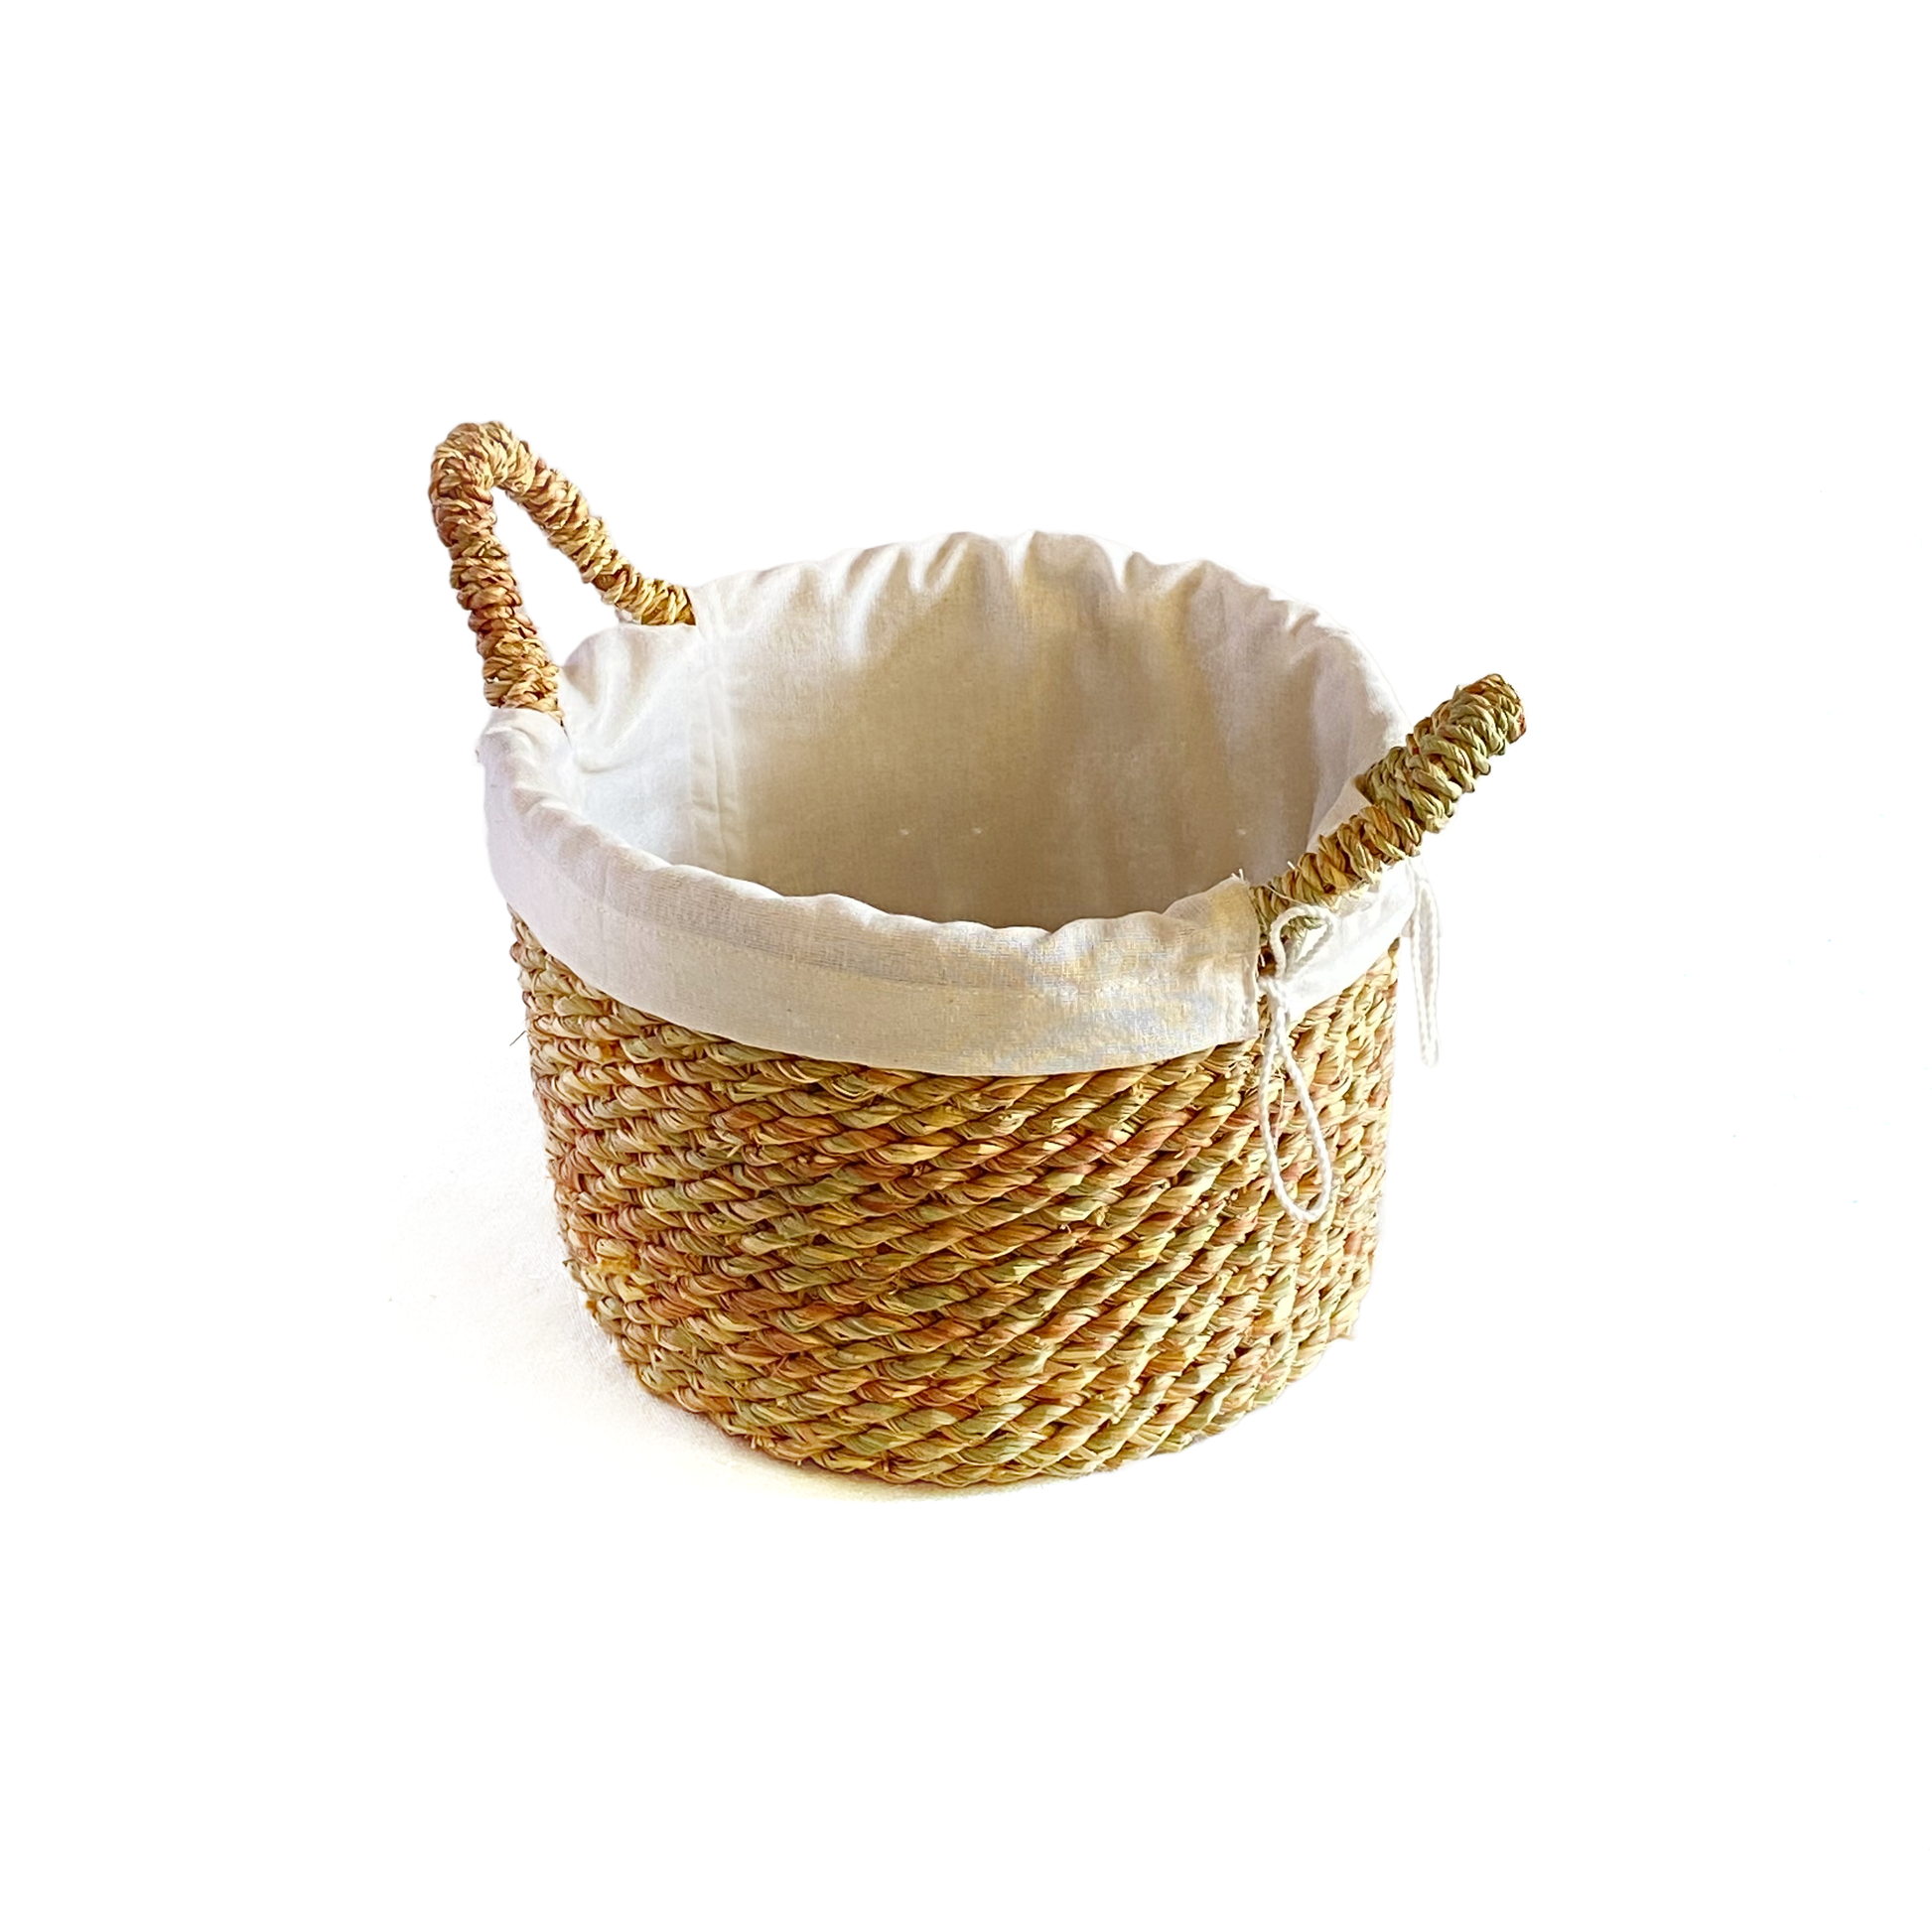 Halfa circular Basket with Handle and Cover سلة حلفا دائرية بيد وجراب